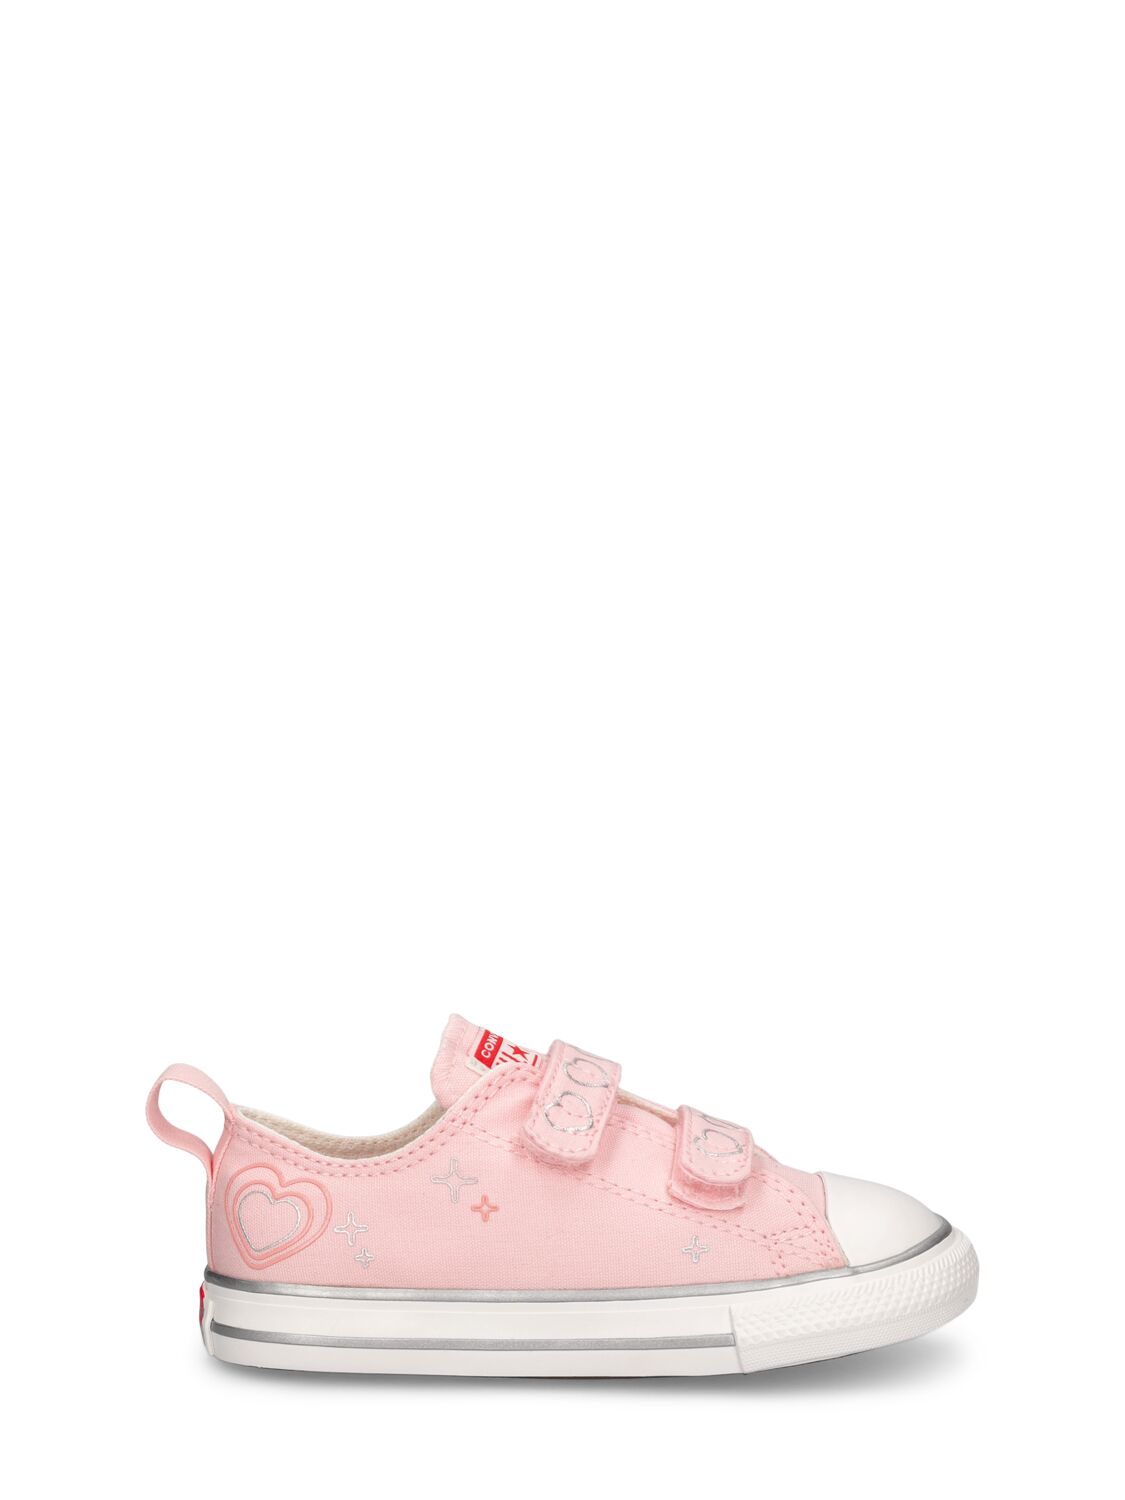 Image of Embroidered Heart Canvas Strap Sneakers